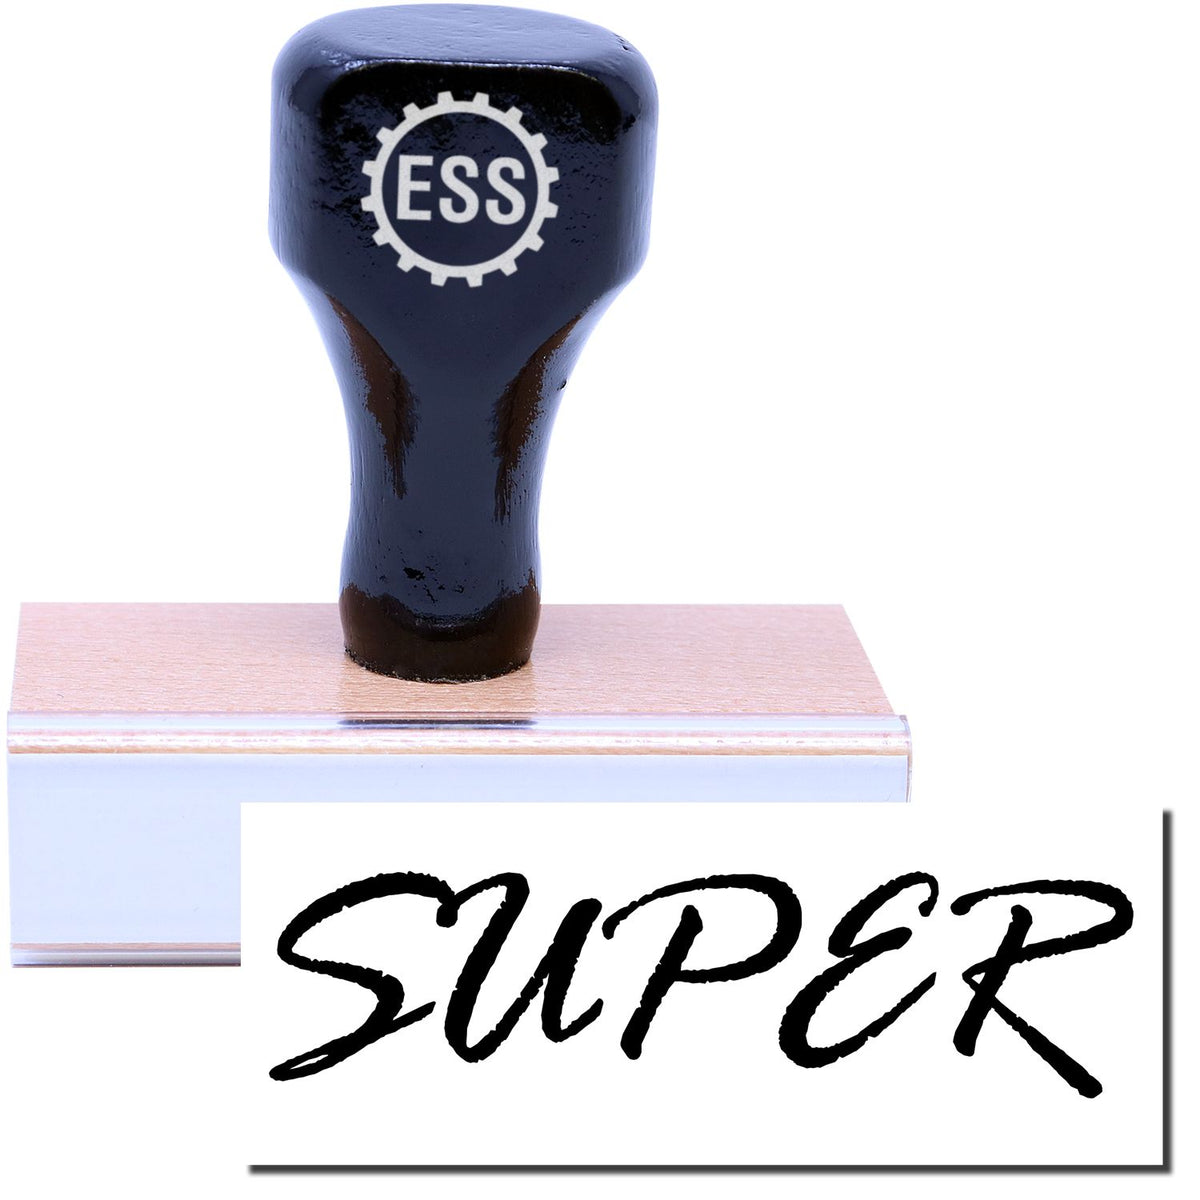 A stock office rubber stamp with a stamped image showing how the text &quot;SUPER&quot; in a large font is displayed after stamping.